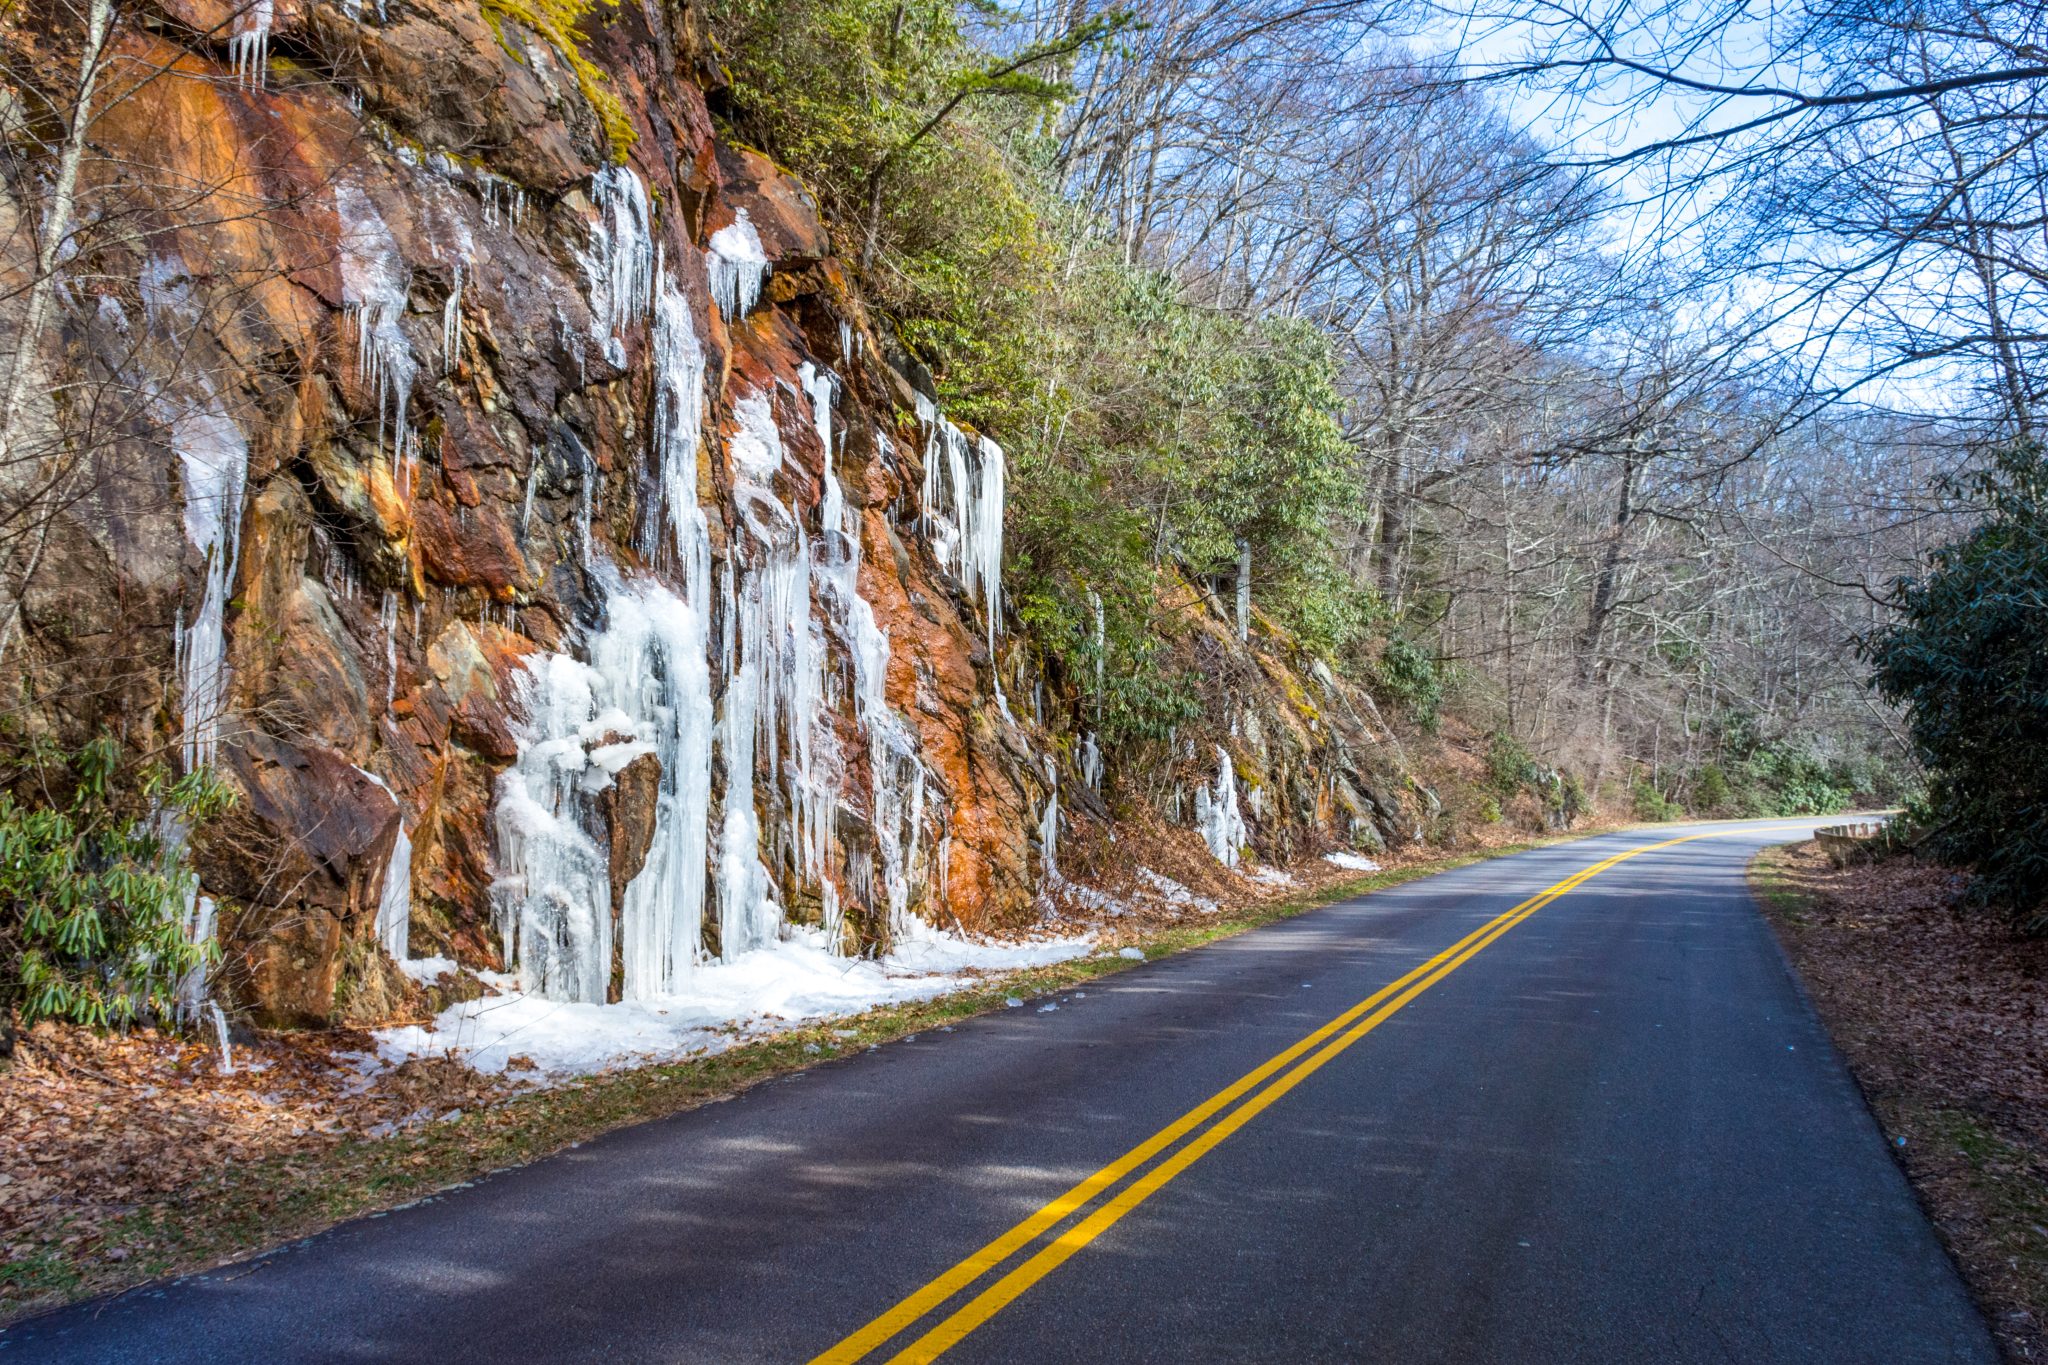 Icy water runoff on the side of a road